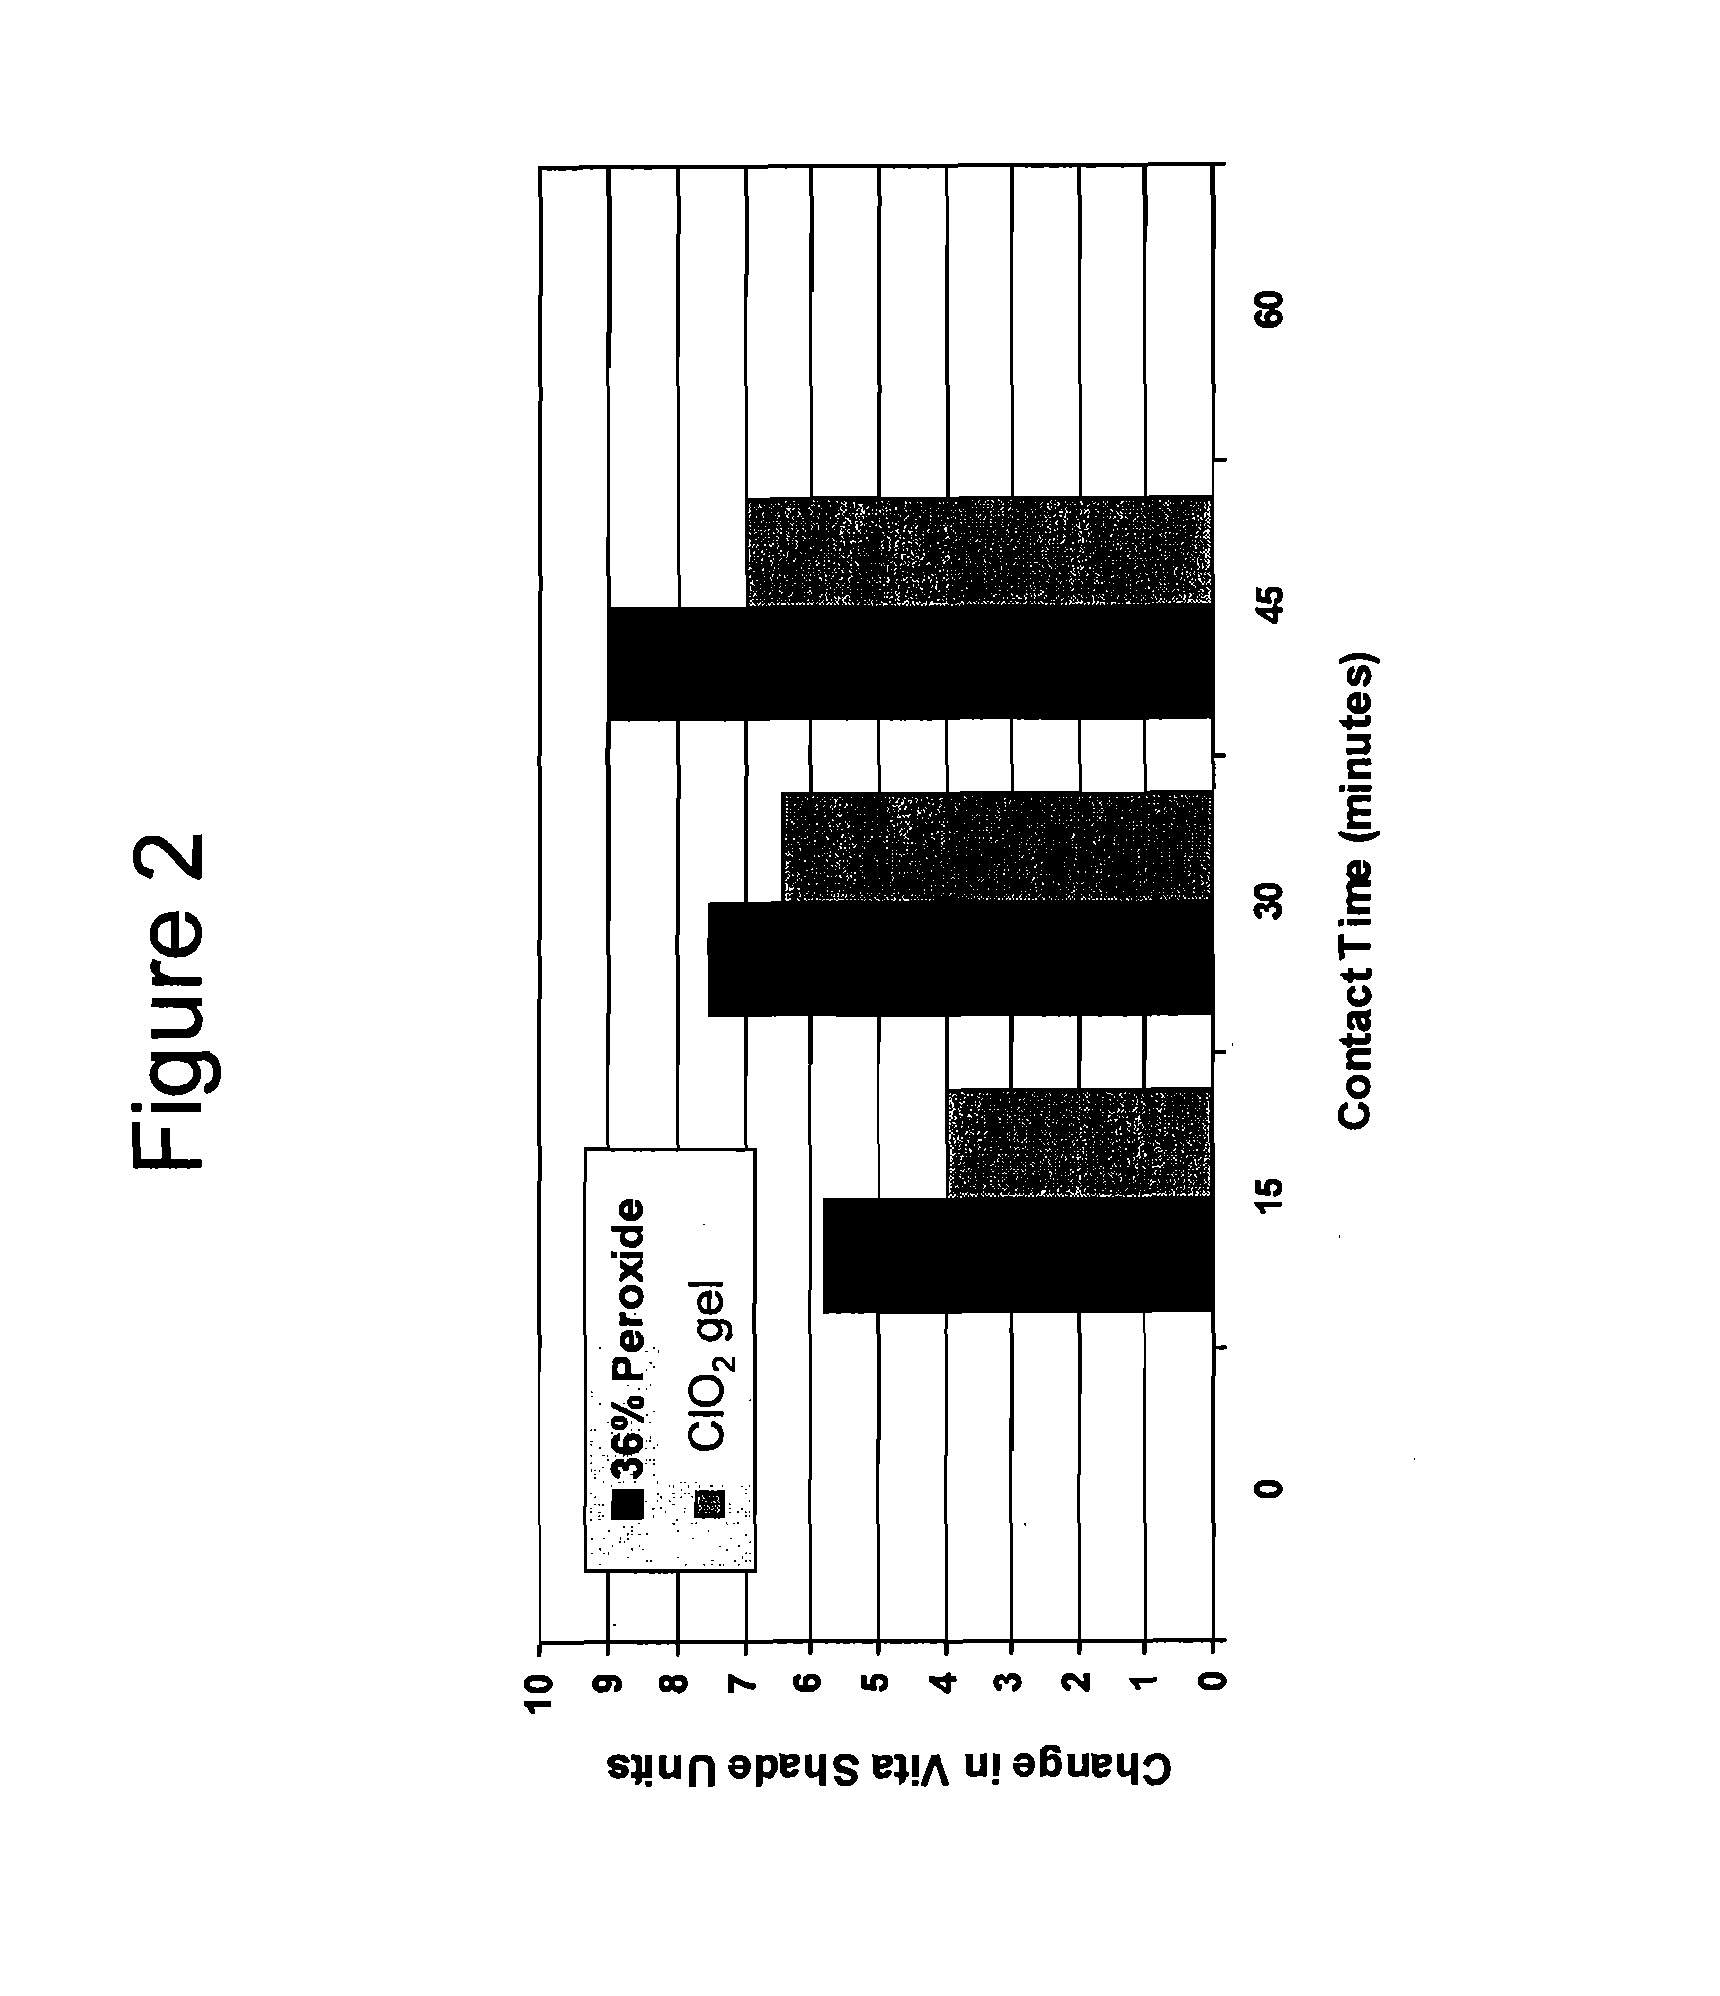 Tooth polishing compositions and methods of tooth polishing without mechanical abrasion